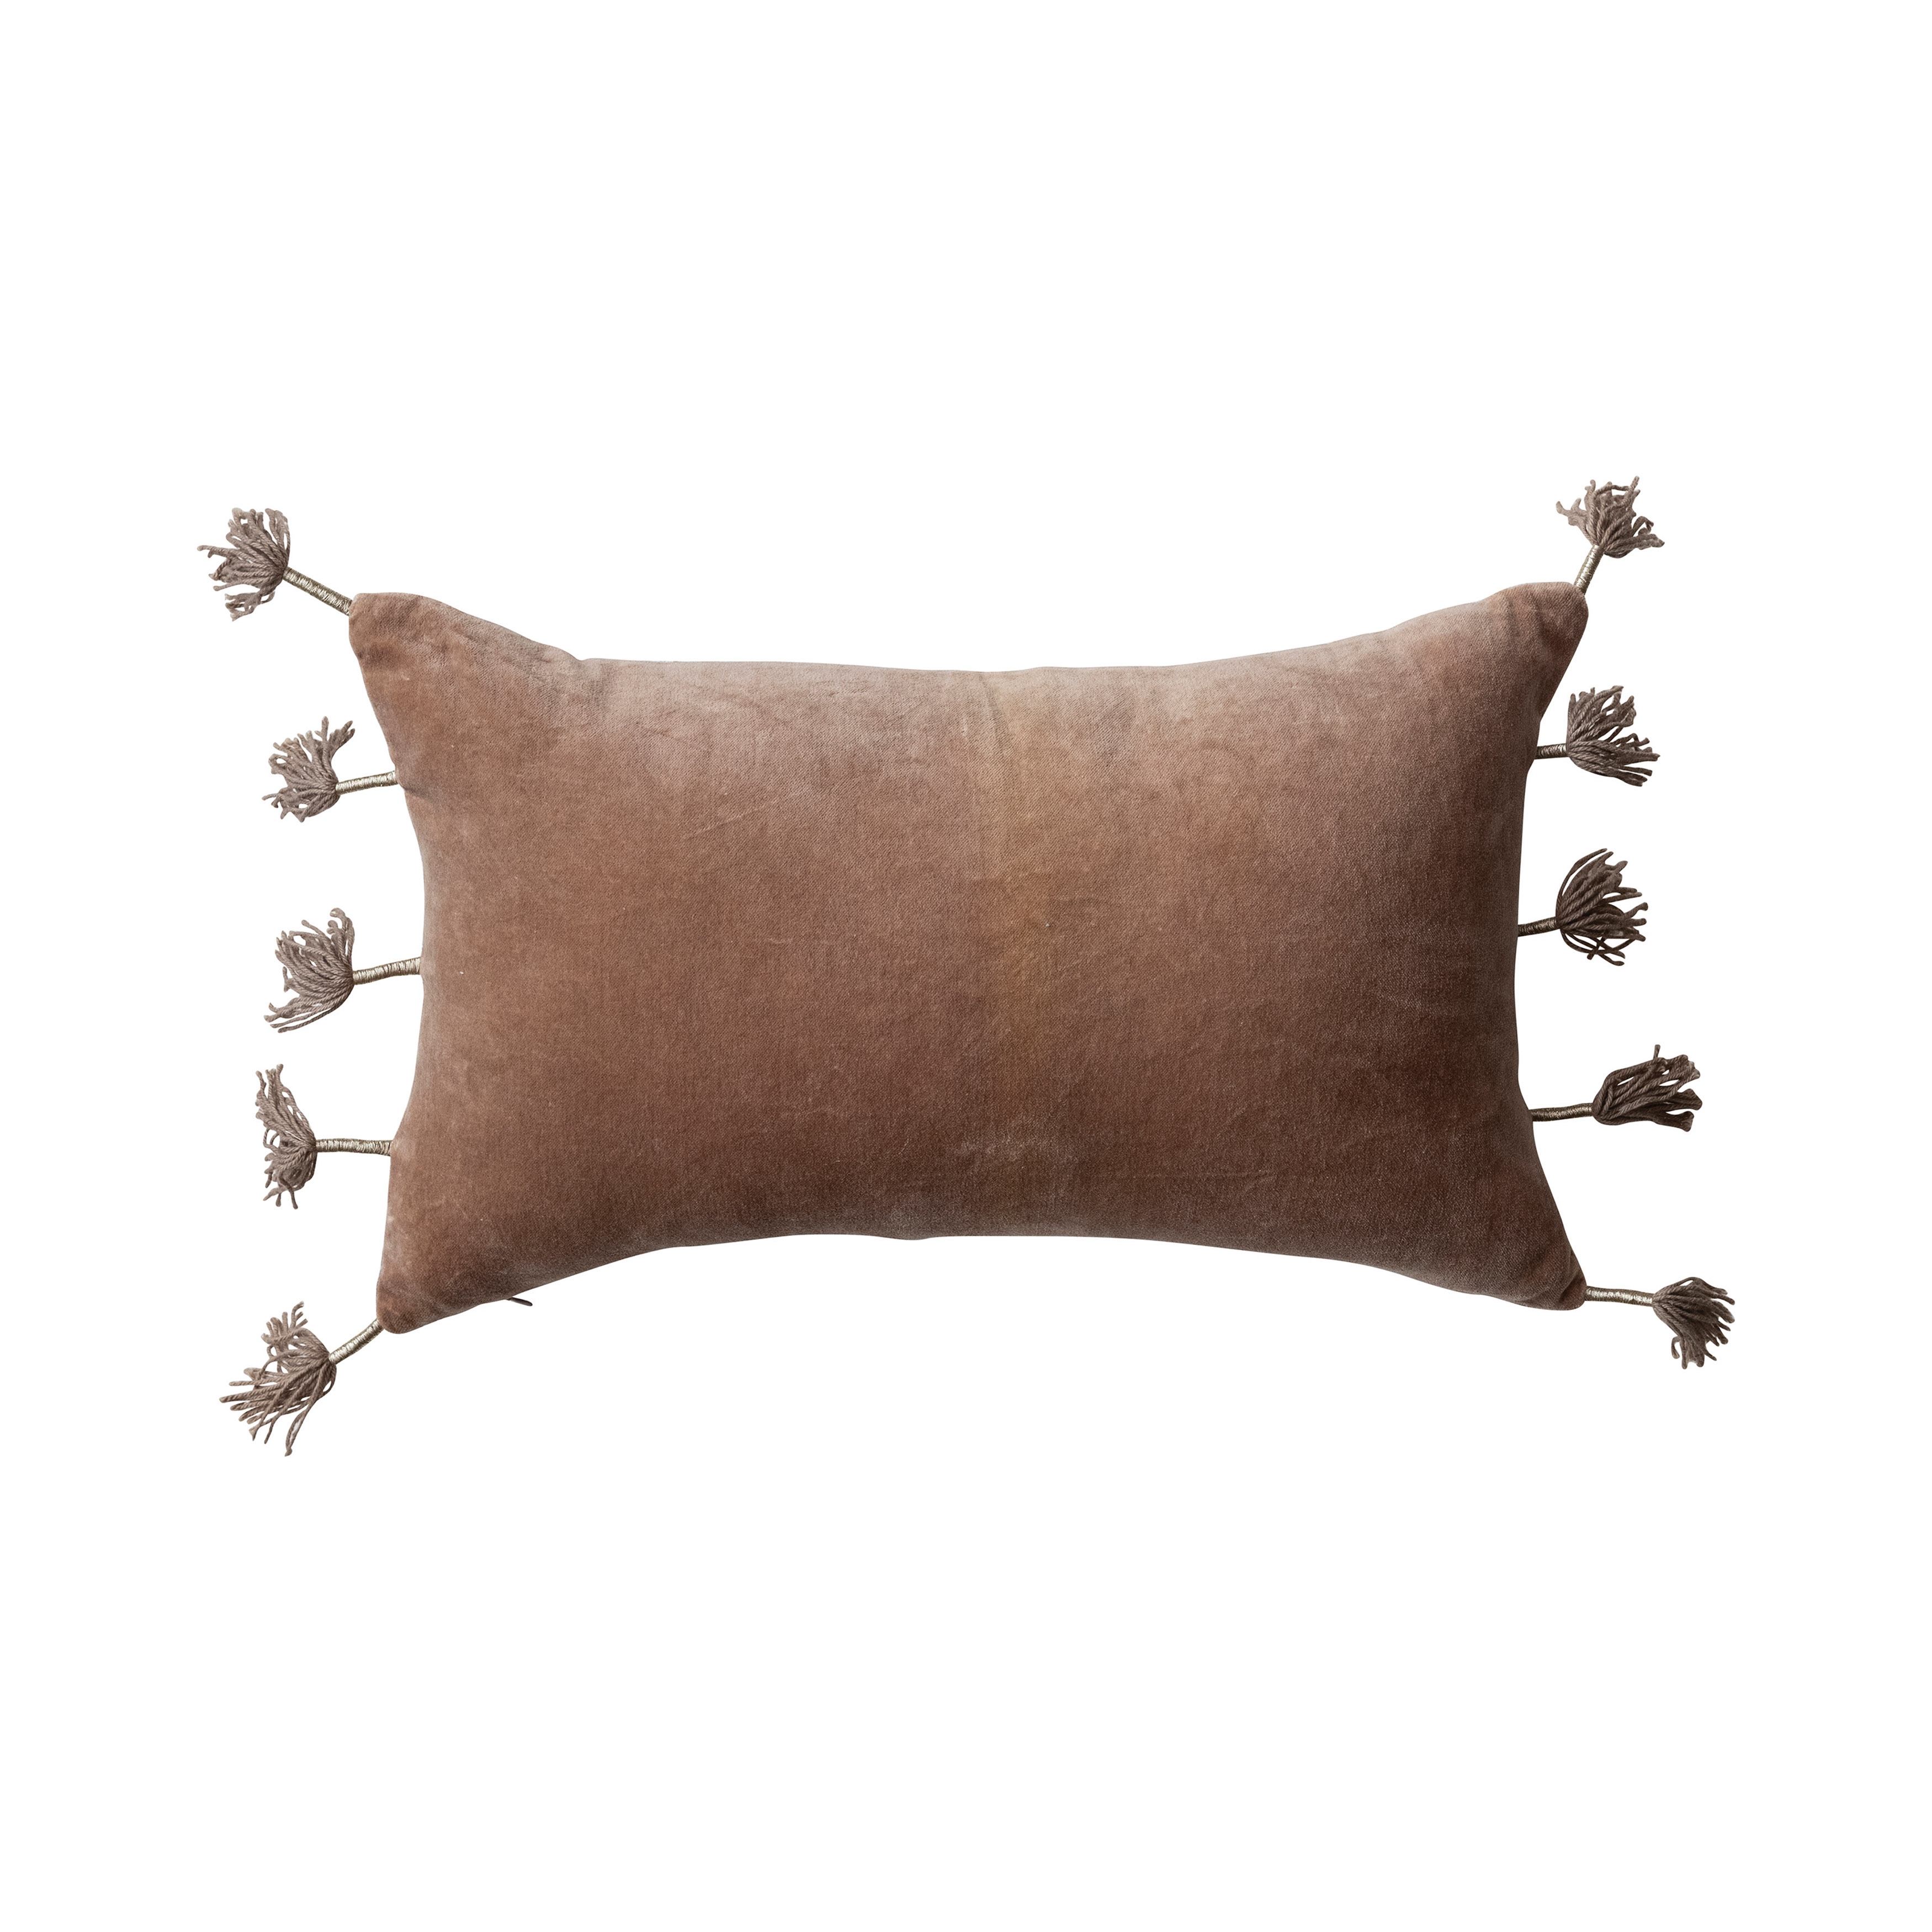 Cotton Velvet Lumbar Pillow with Metallic Tassels and Linen Back, Brown and Natural - Image 0